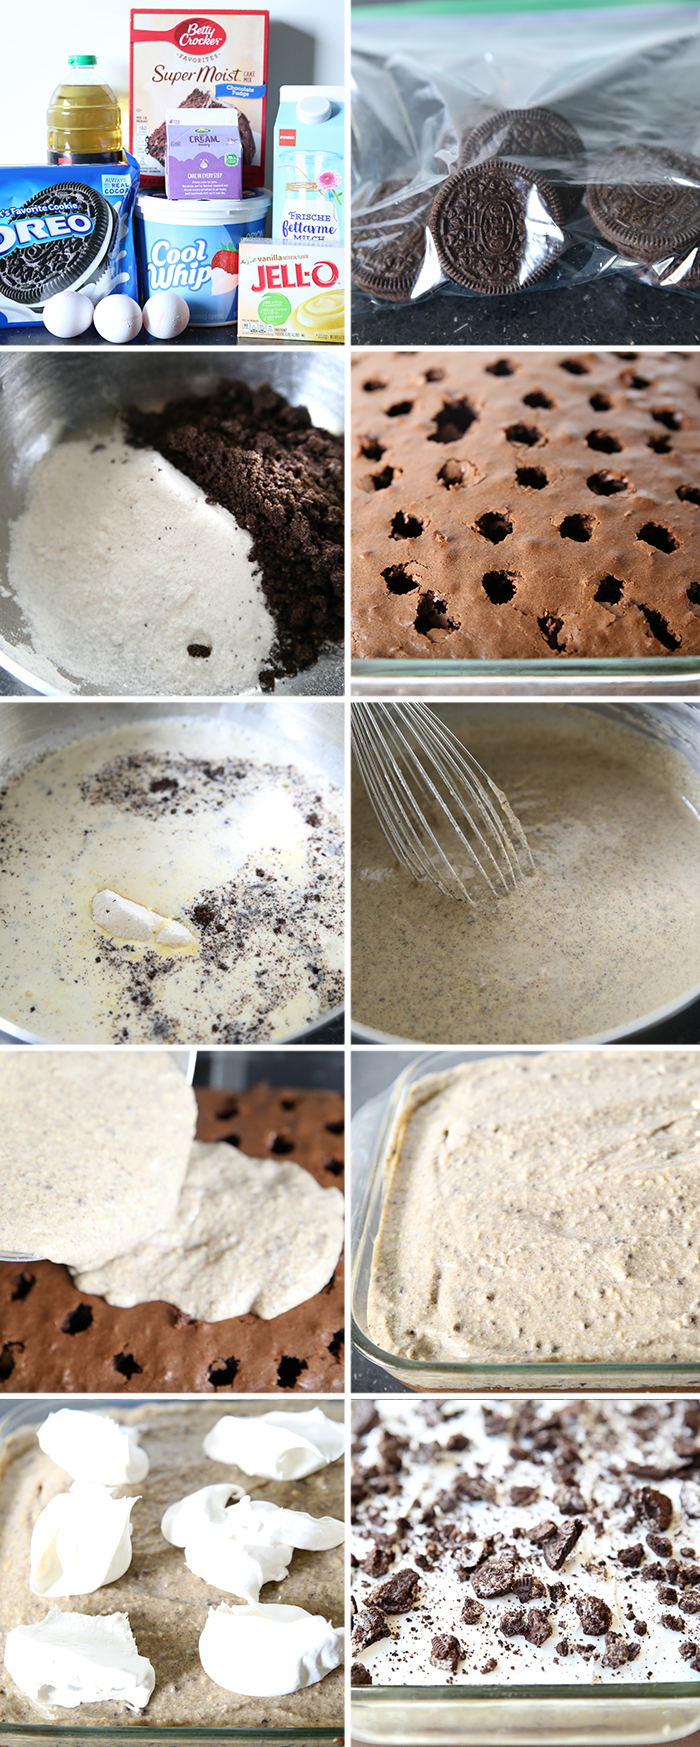 10-picture photo collage of step-by-step instructions on how to make Oreo Poke Cake.